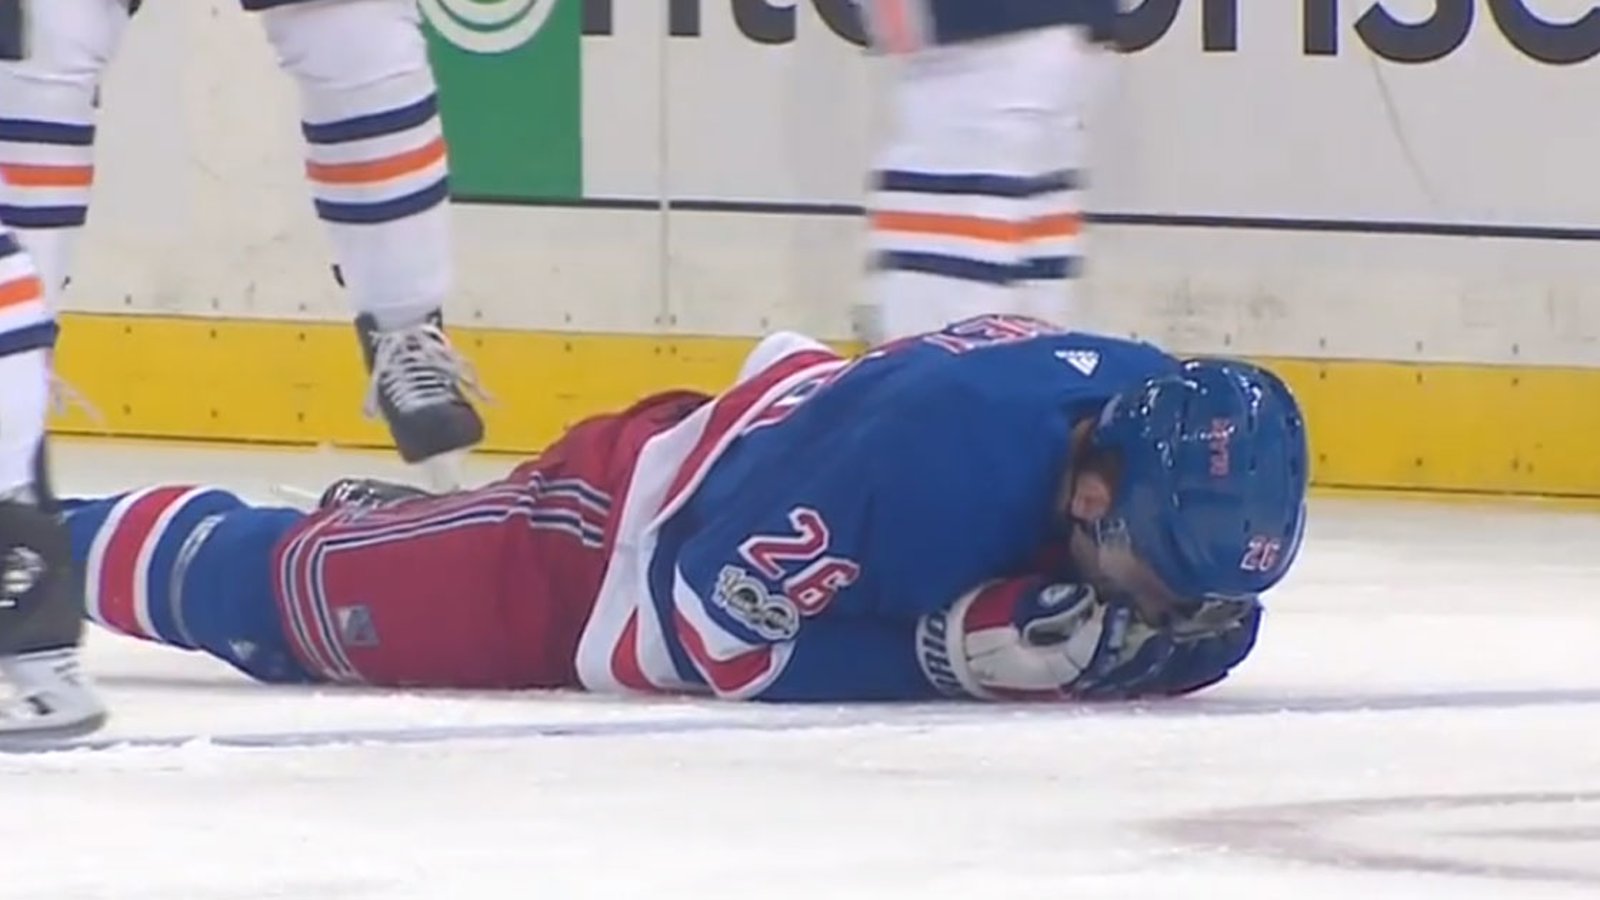 Must See: Rangers' forward takes a skate to the face, suffers scary injury